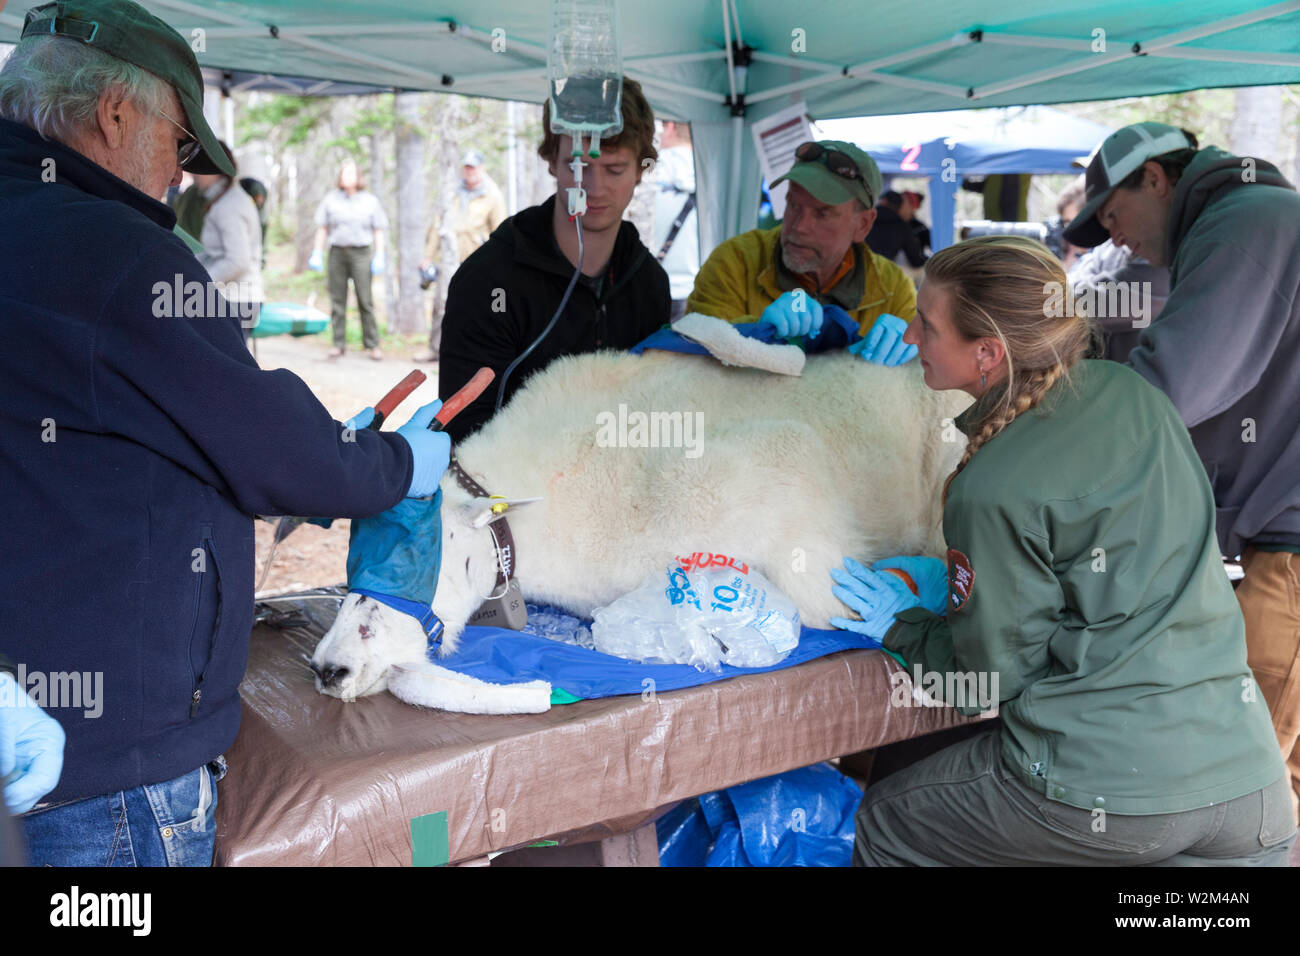 A team of rangers, employees and volunteers assess and stabilize a tranquilized mountain goat before crating at Hurricane Ridge in Olympic National Park, Washington on July 9, 2019. Today is the second day of a two-week long capture and translocation process moving mountain goats from Olympic National Park to the northern Cascade Mountains. The effort is a collaboration between the National Park Service, the Washington Department of Fish & Wildlife and the USDA Forest Service to re-establish depleted populations of mountain goats in the Northern Cascades while also removing non-native goats fr Stock Photo